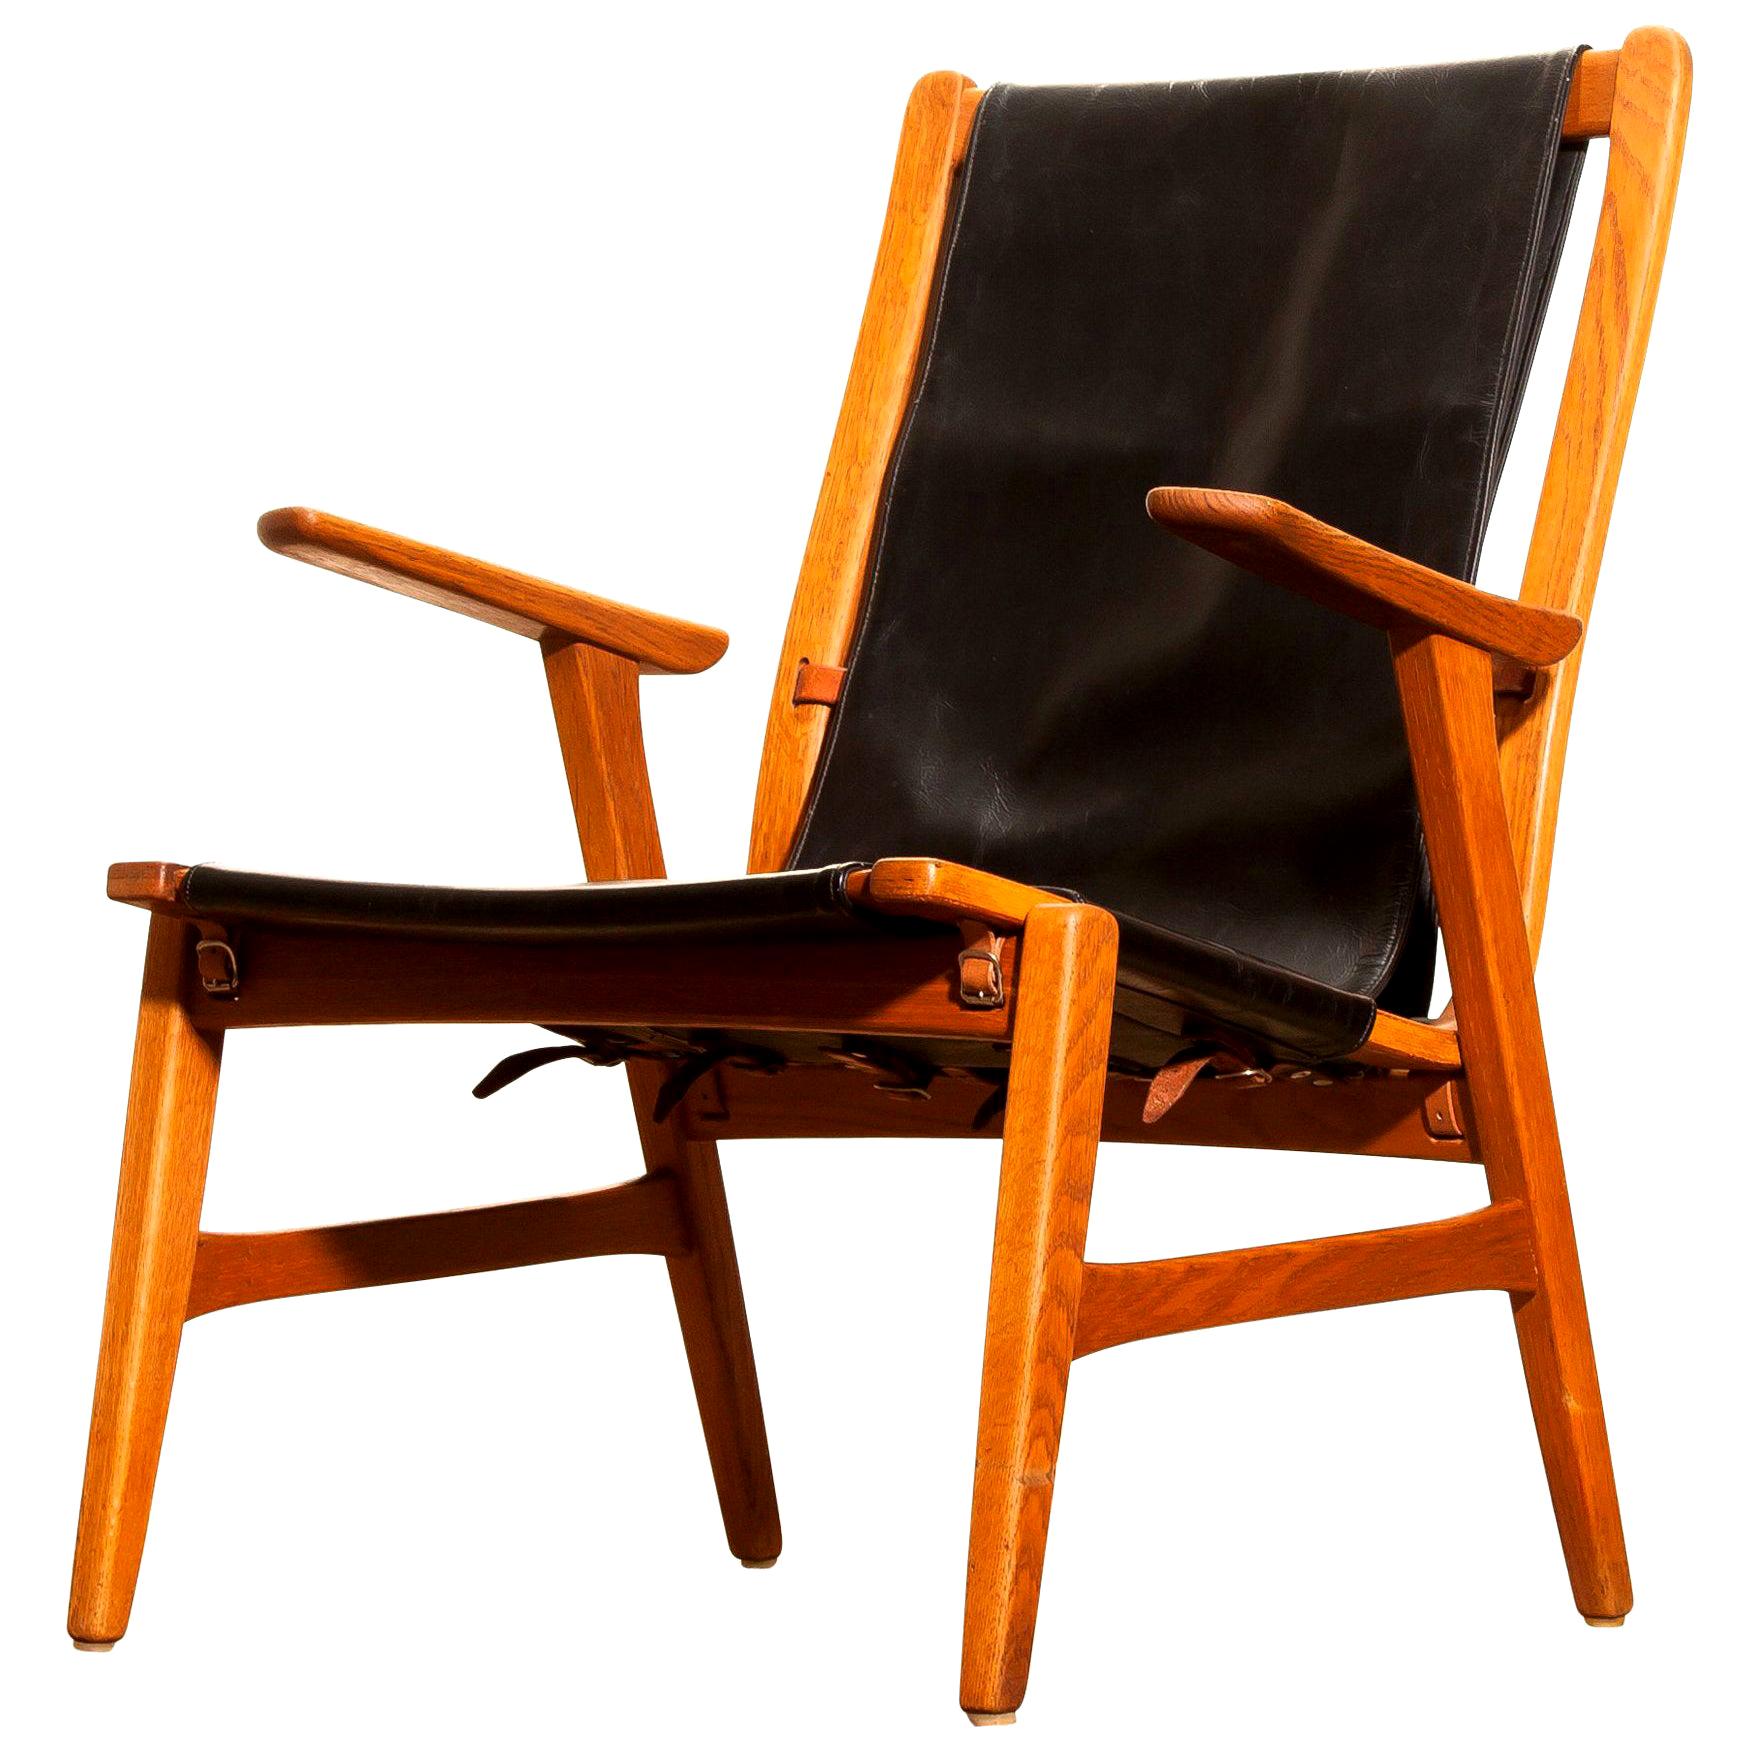 Swedish 1950s, Oak and Leatherette Hunting Lounge Chair 'Ulrika' by Östen Kristiansson